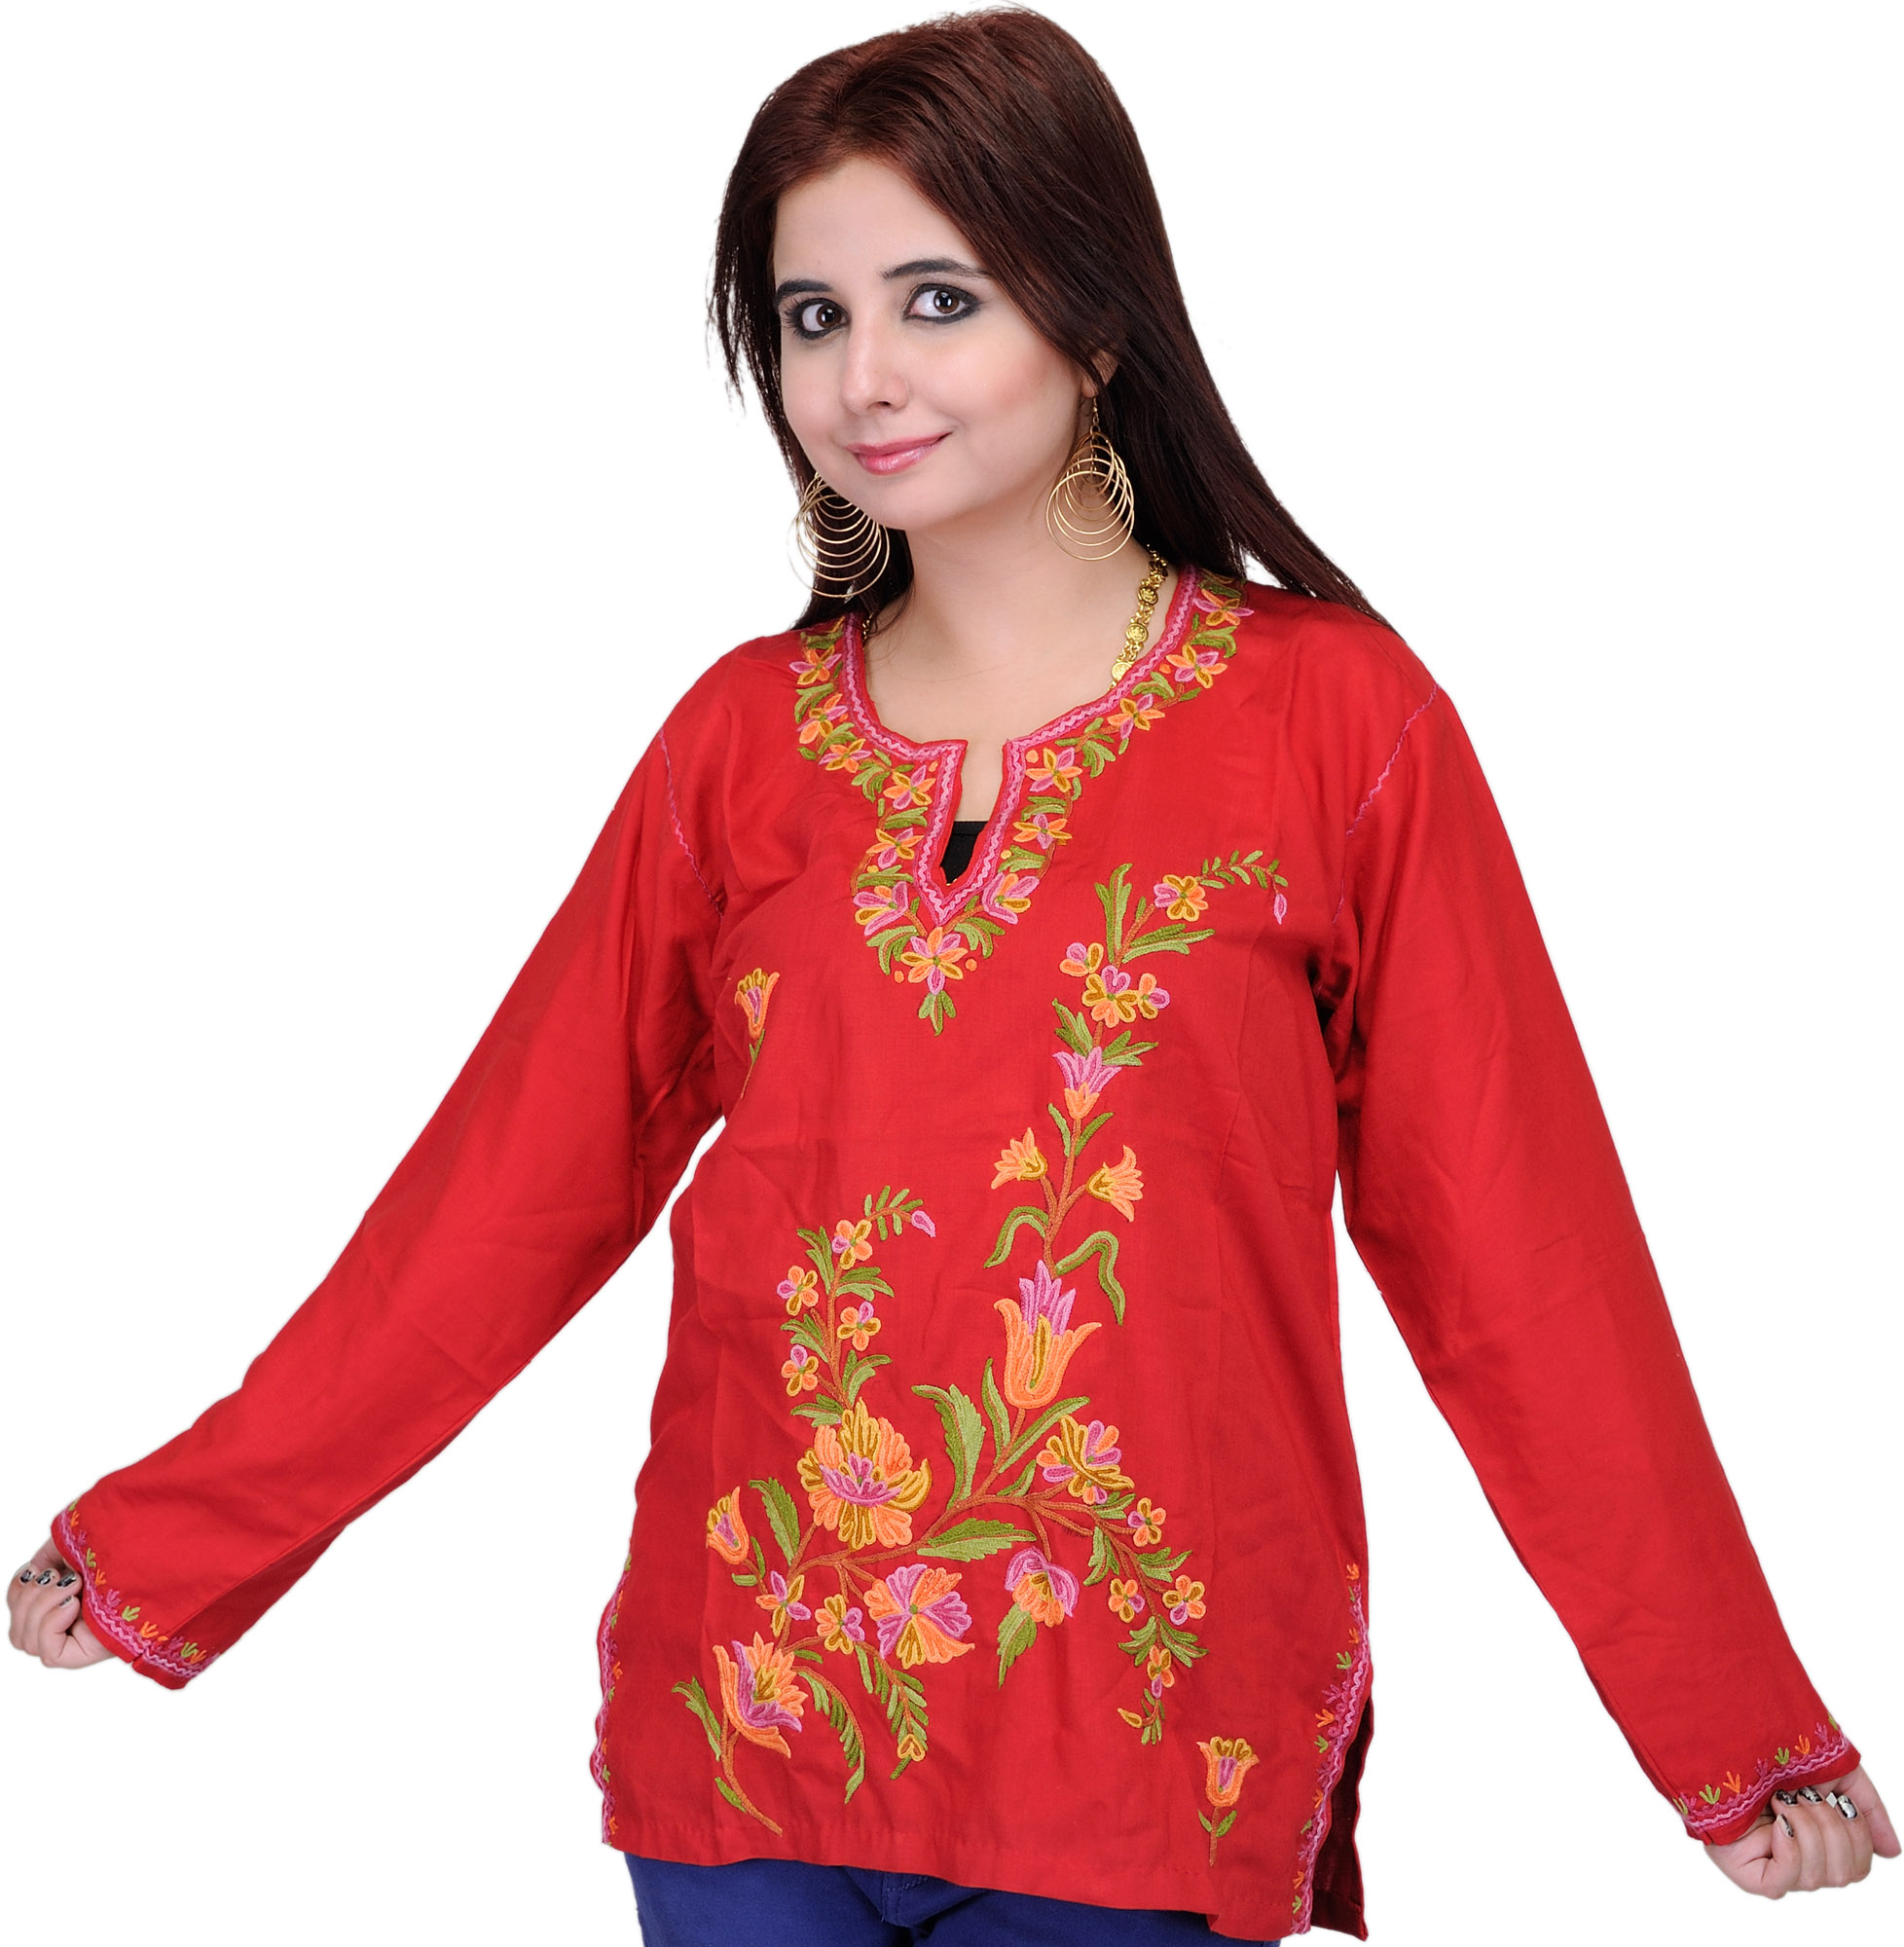 Tomato-Red Kashmiri Kurti with Hand Embroidered Flowers | Exotic India Art